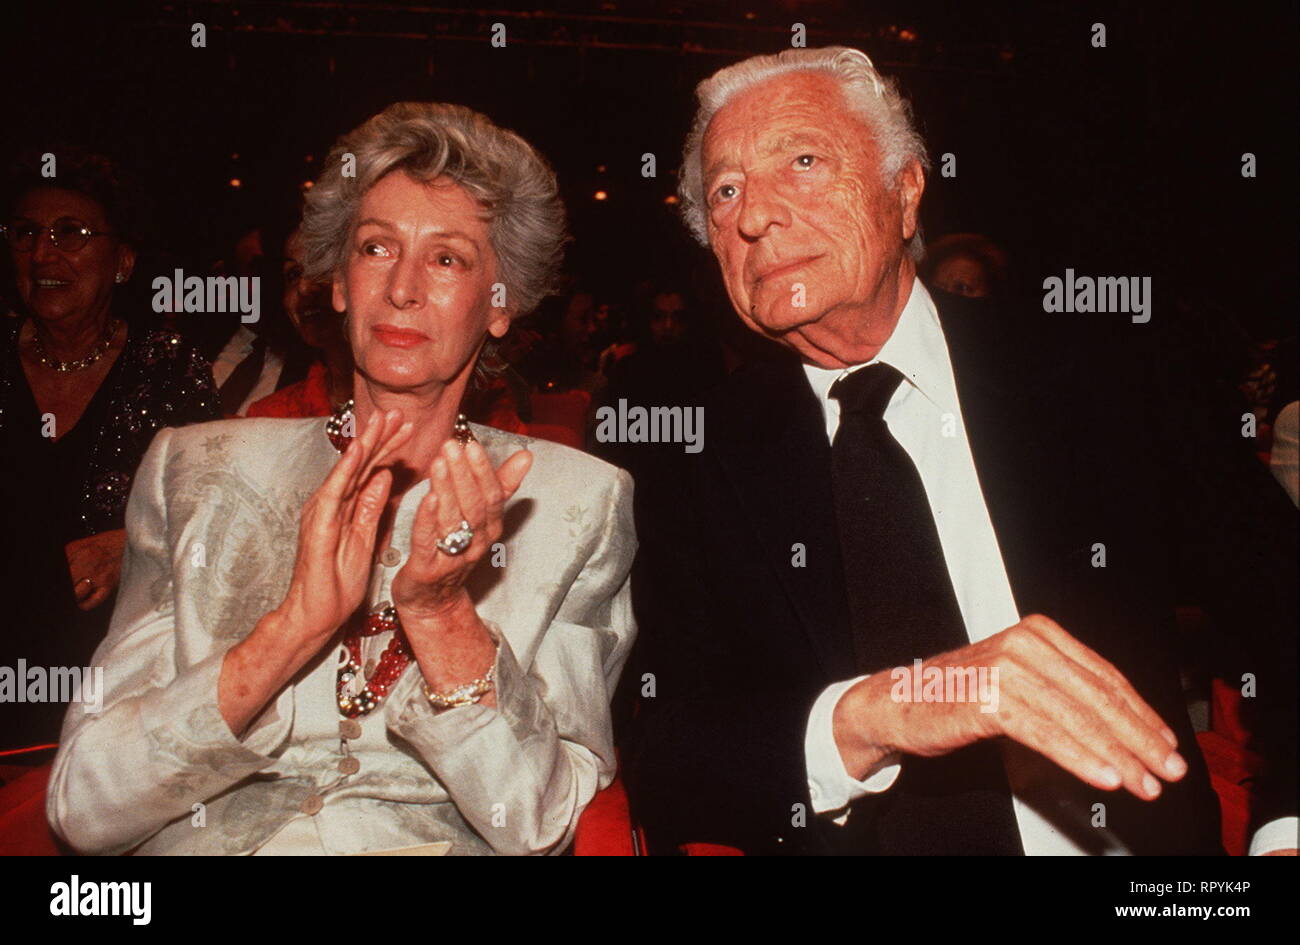 Giovanni Agnelli High Resolution Stock Photography and Images - Alamy